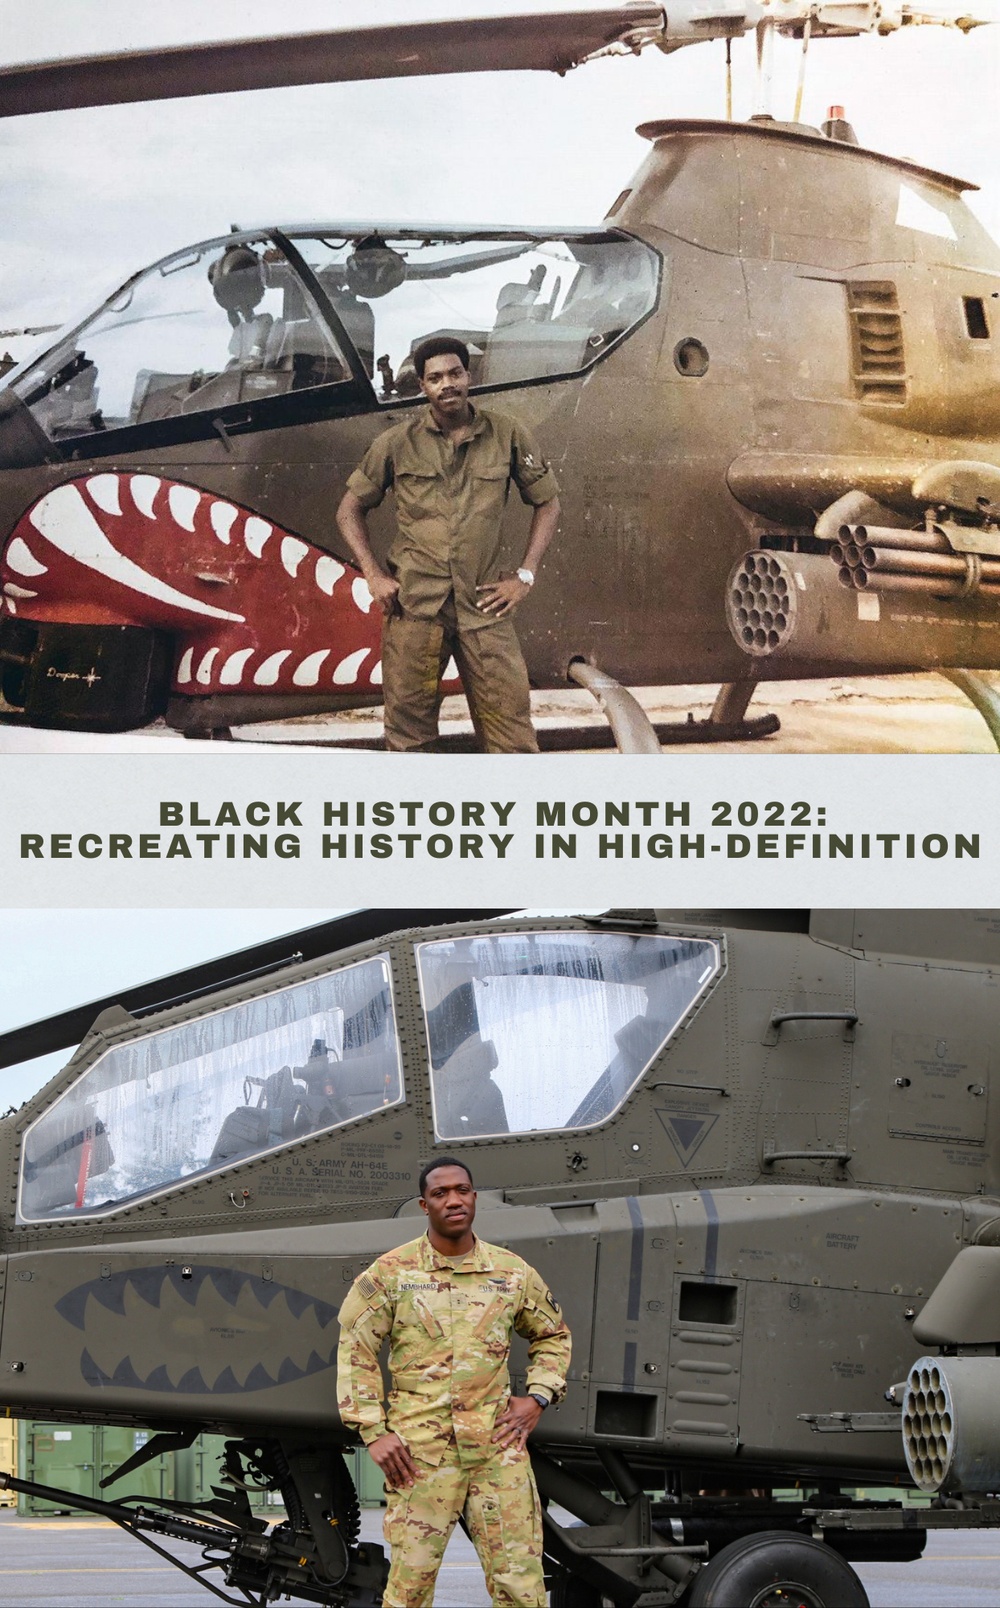 Black History Month 2022: Recreating History in High Definition